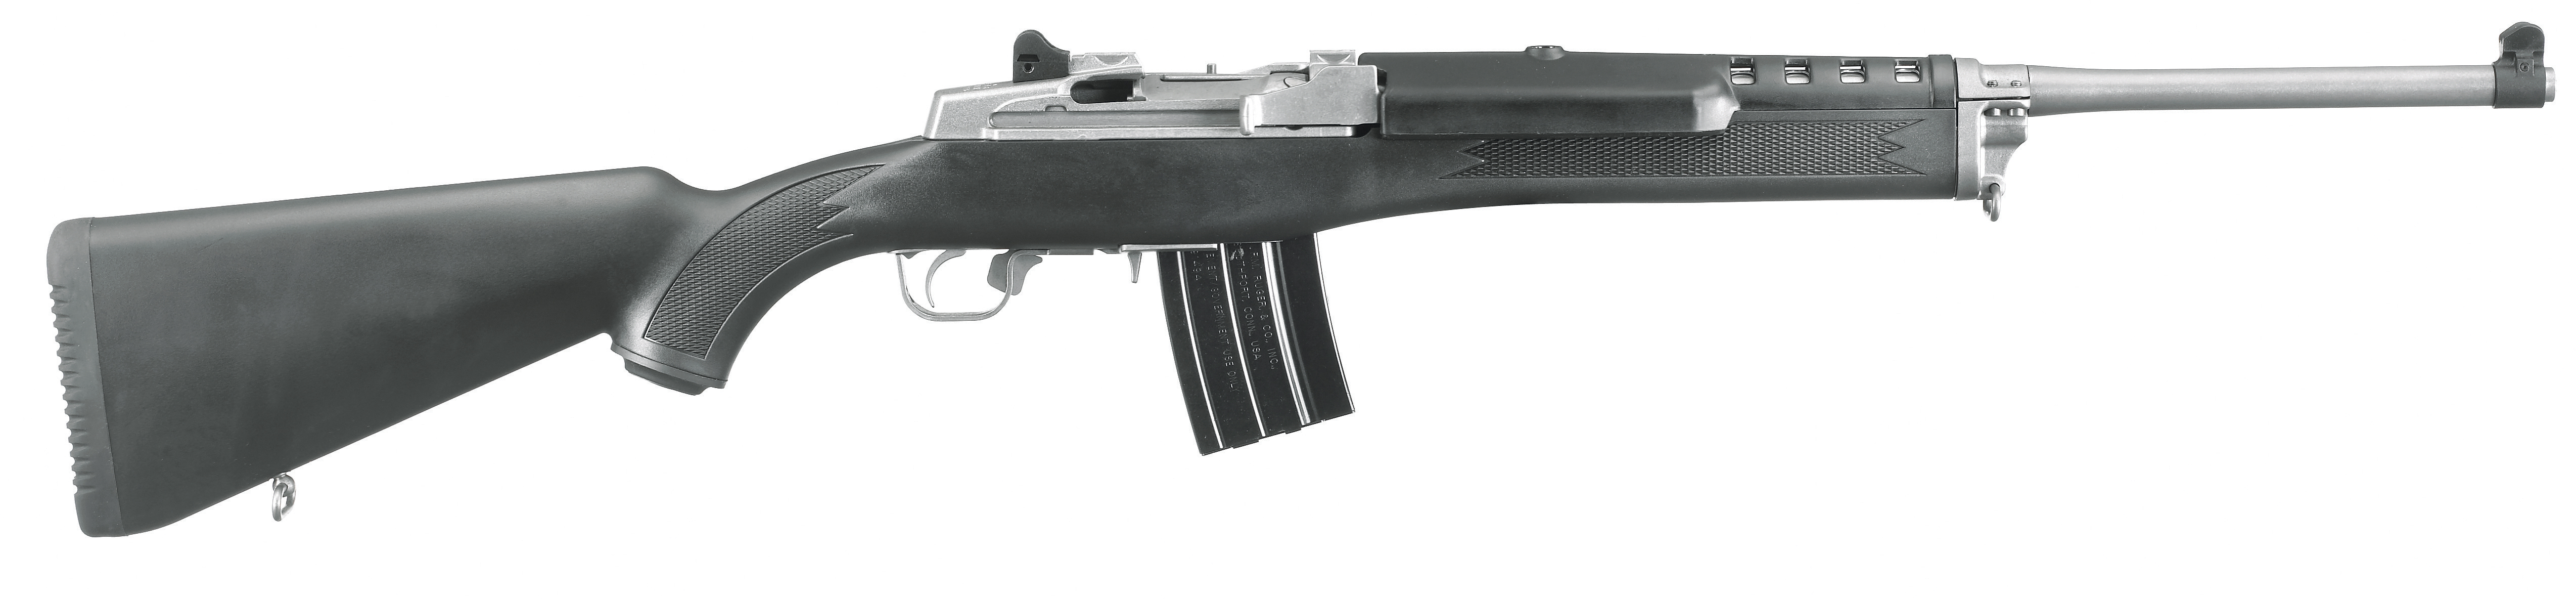 Weapons   Ruger Mini 14 Wallpaper